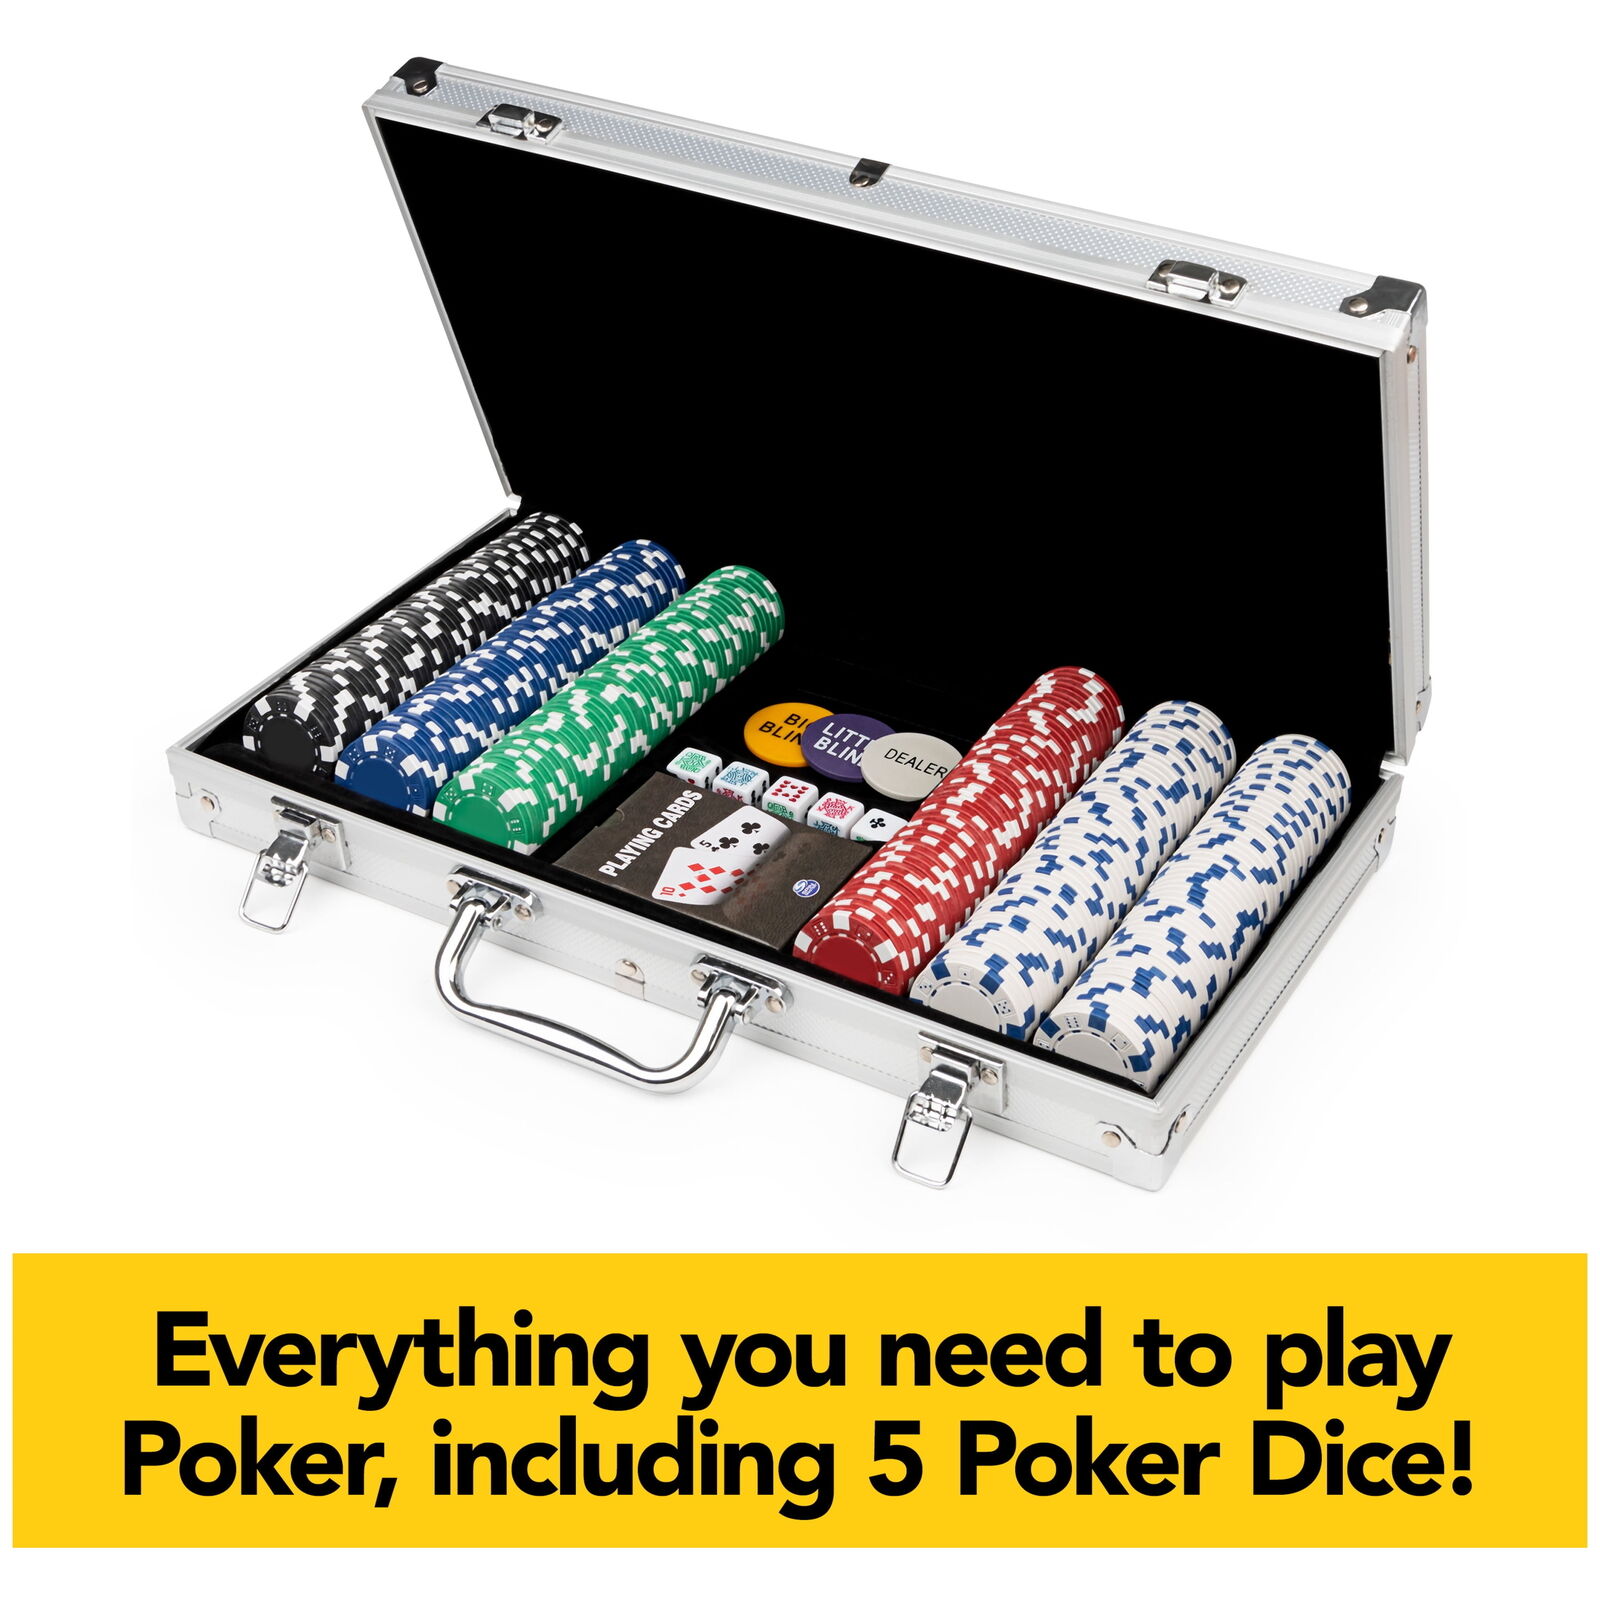 300-Piece Poker Set with Aluminum Carrying Case Weight Chips Plus 5 Poker Dice